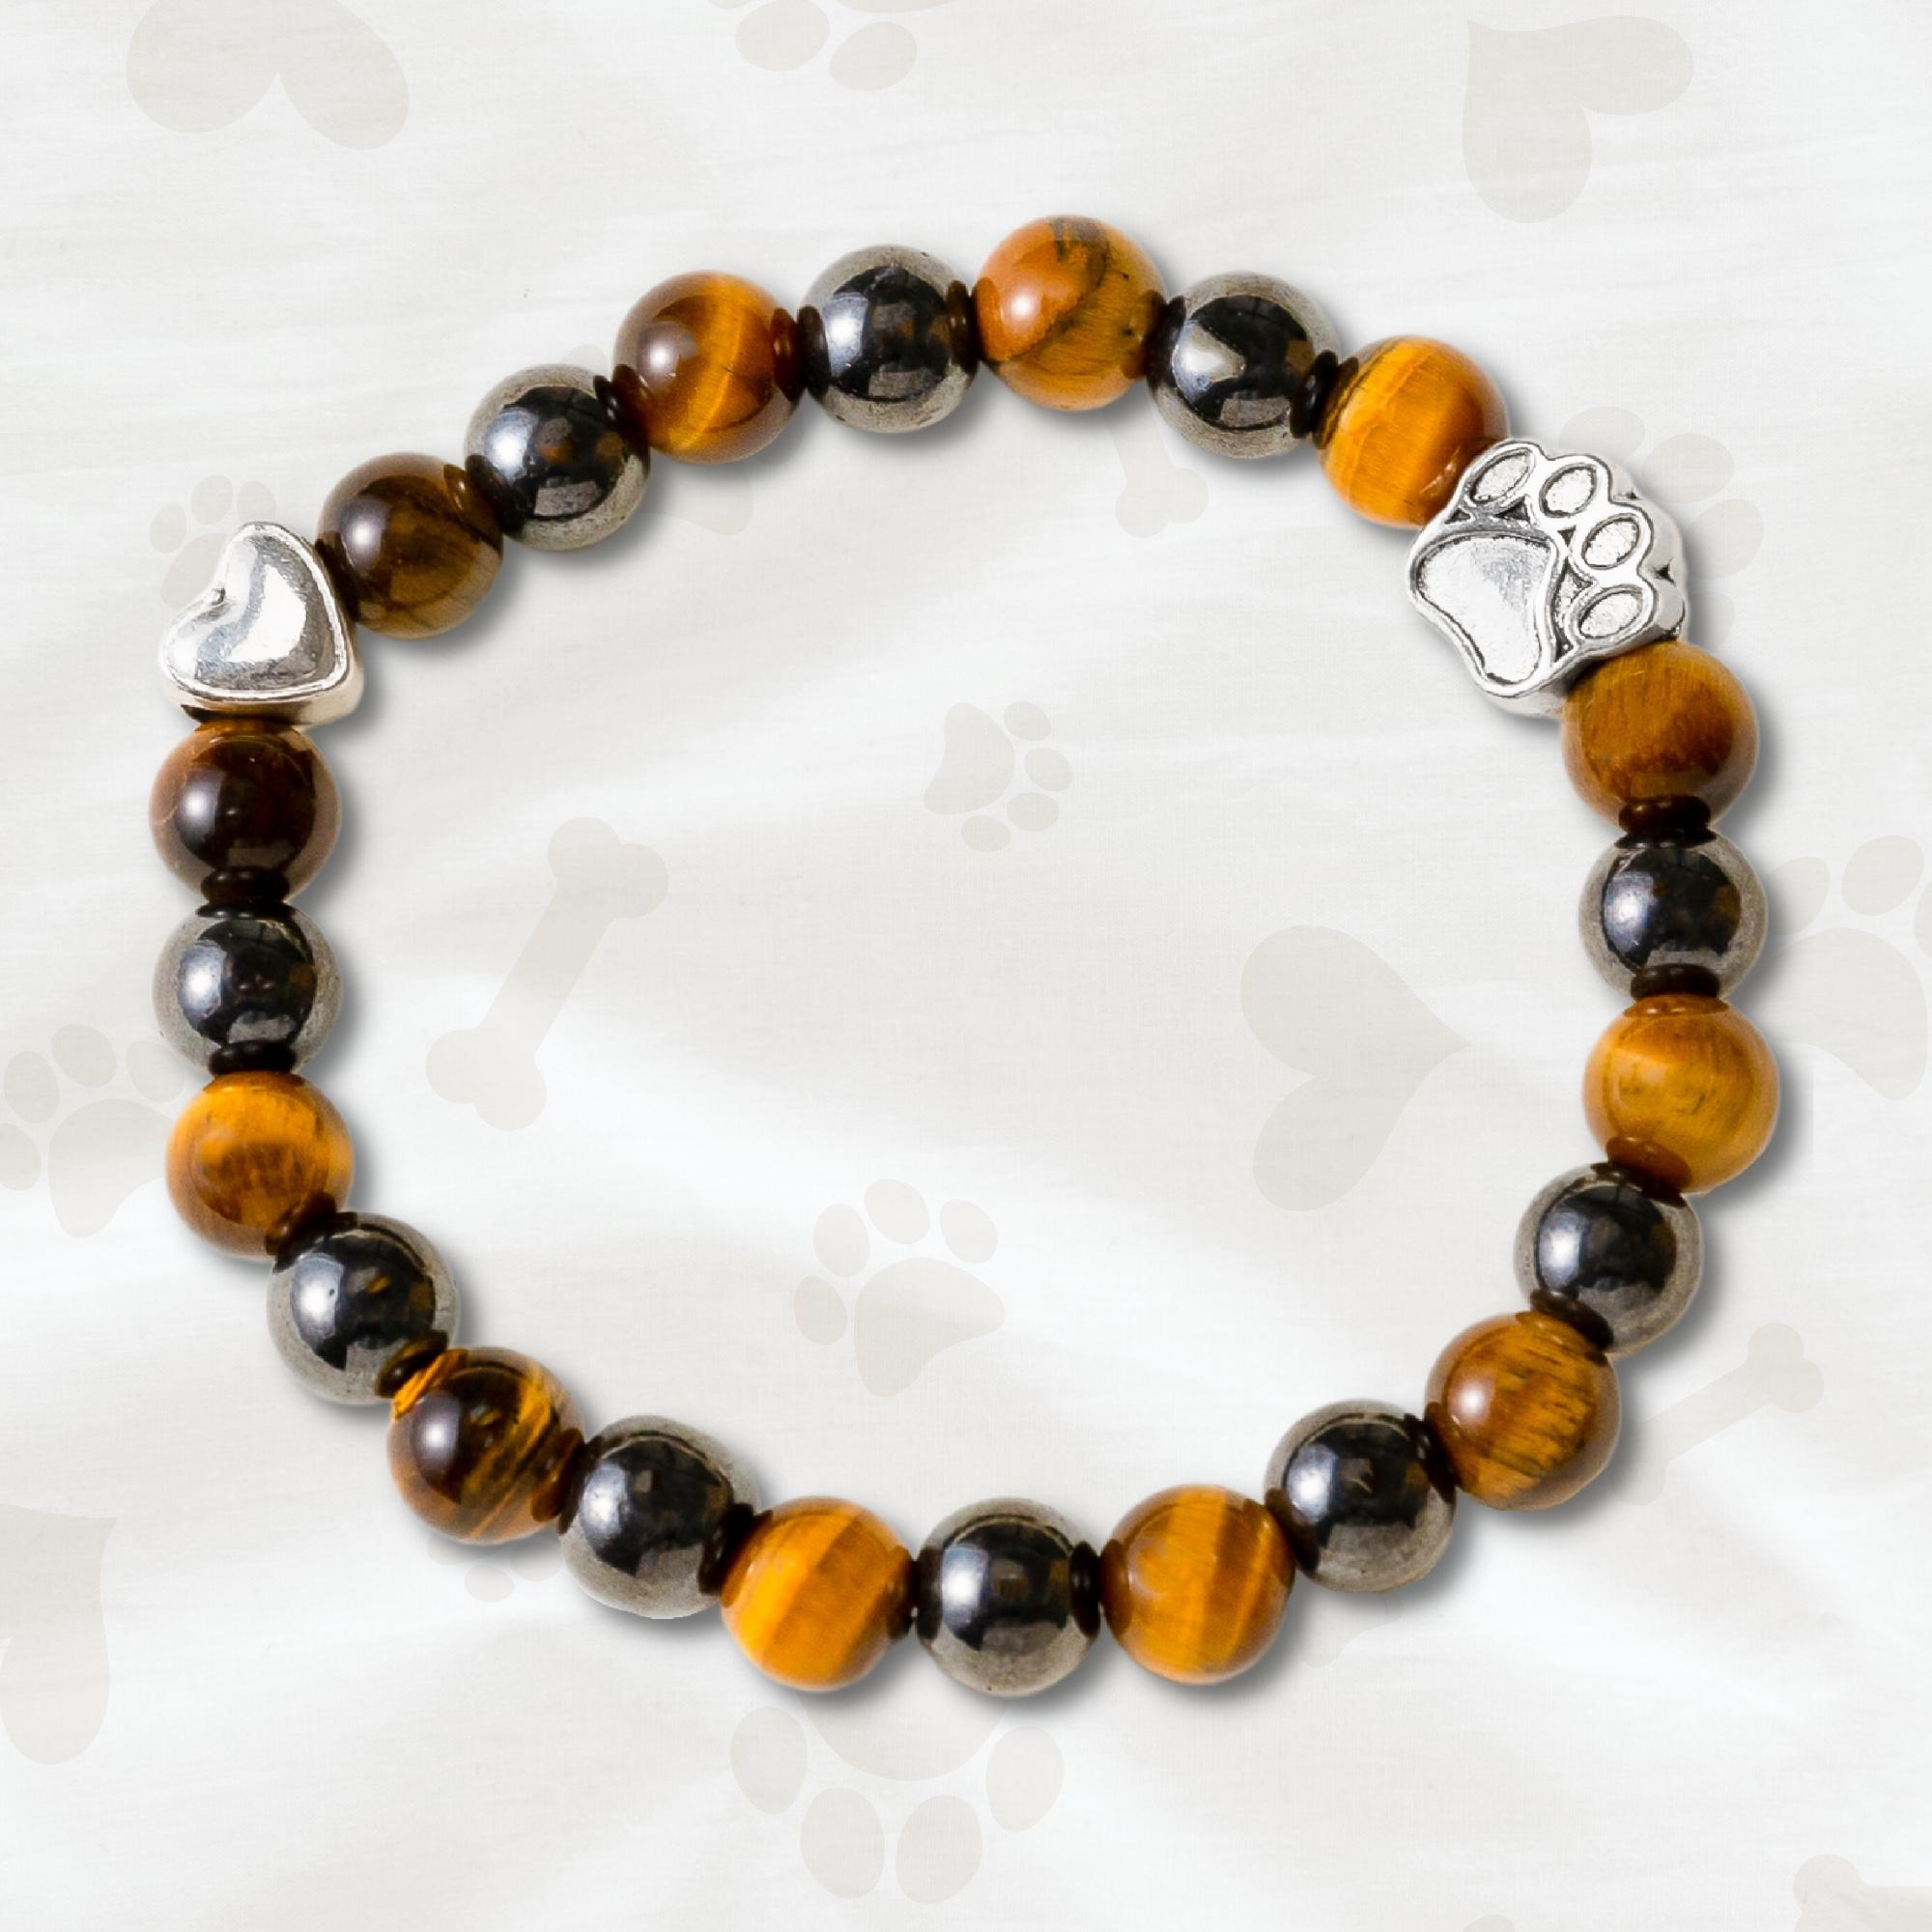 10. Bound By Love Tiger's Eye Magnetic Therapy Bracelet